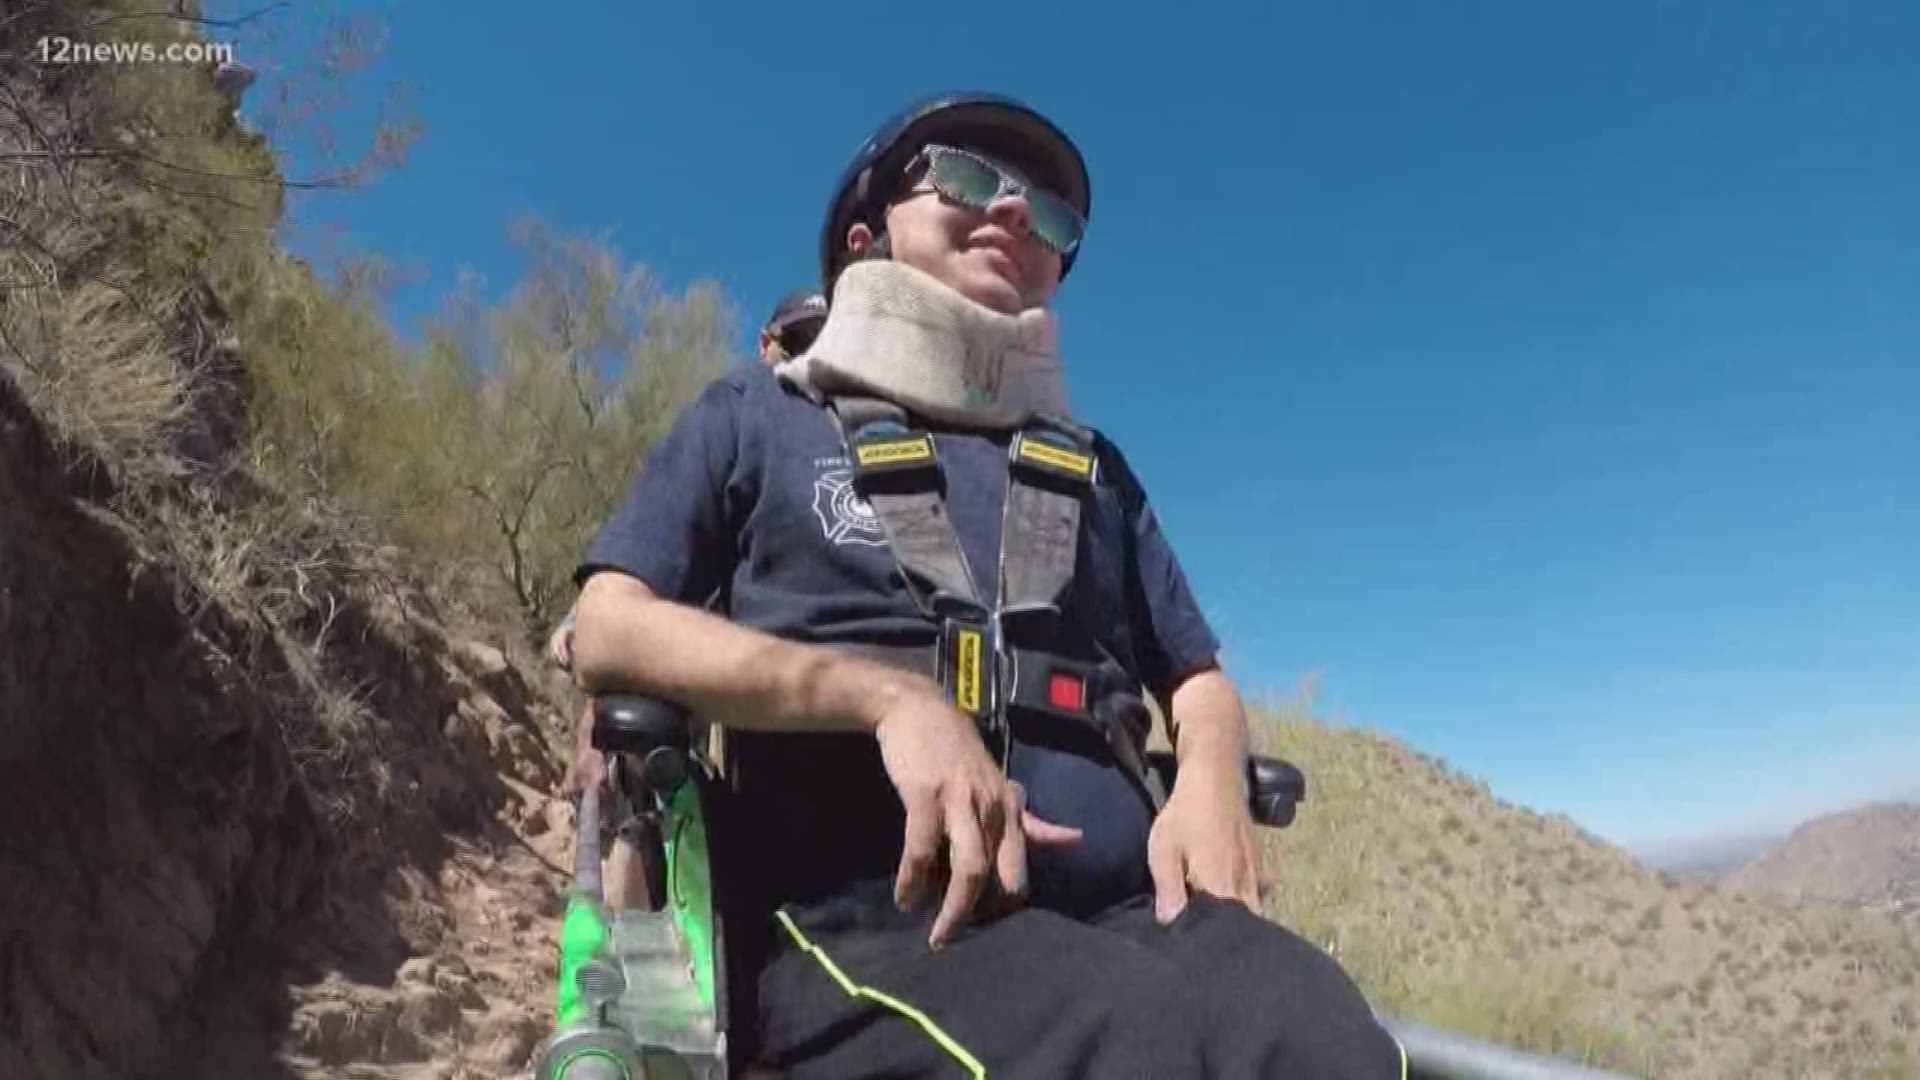 A group of firefighters and volunteers help make a boy with muscular dystrophy's dream come true by carrying him to the top of Camelback Mountain.